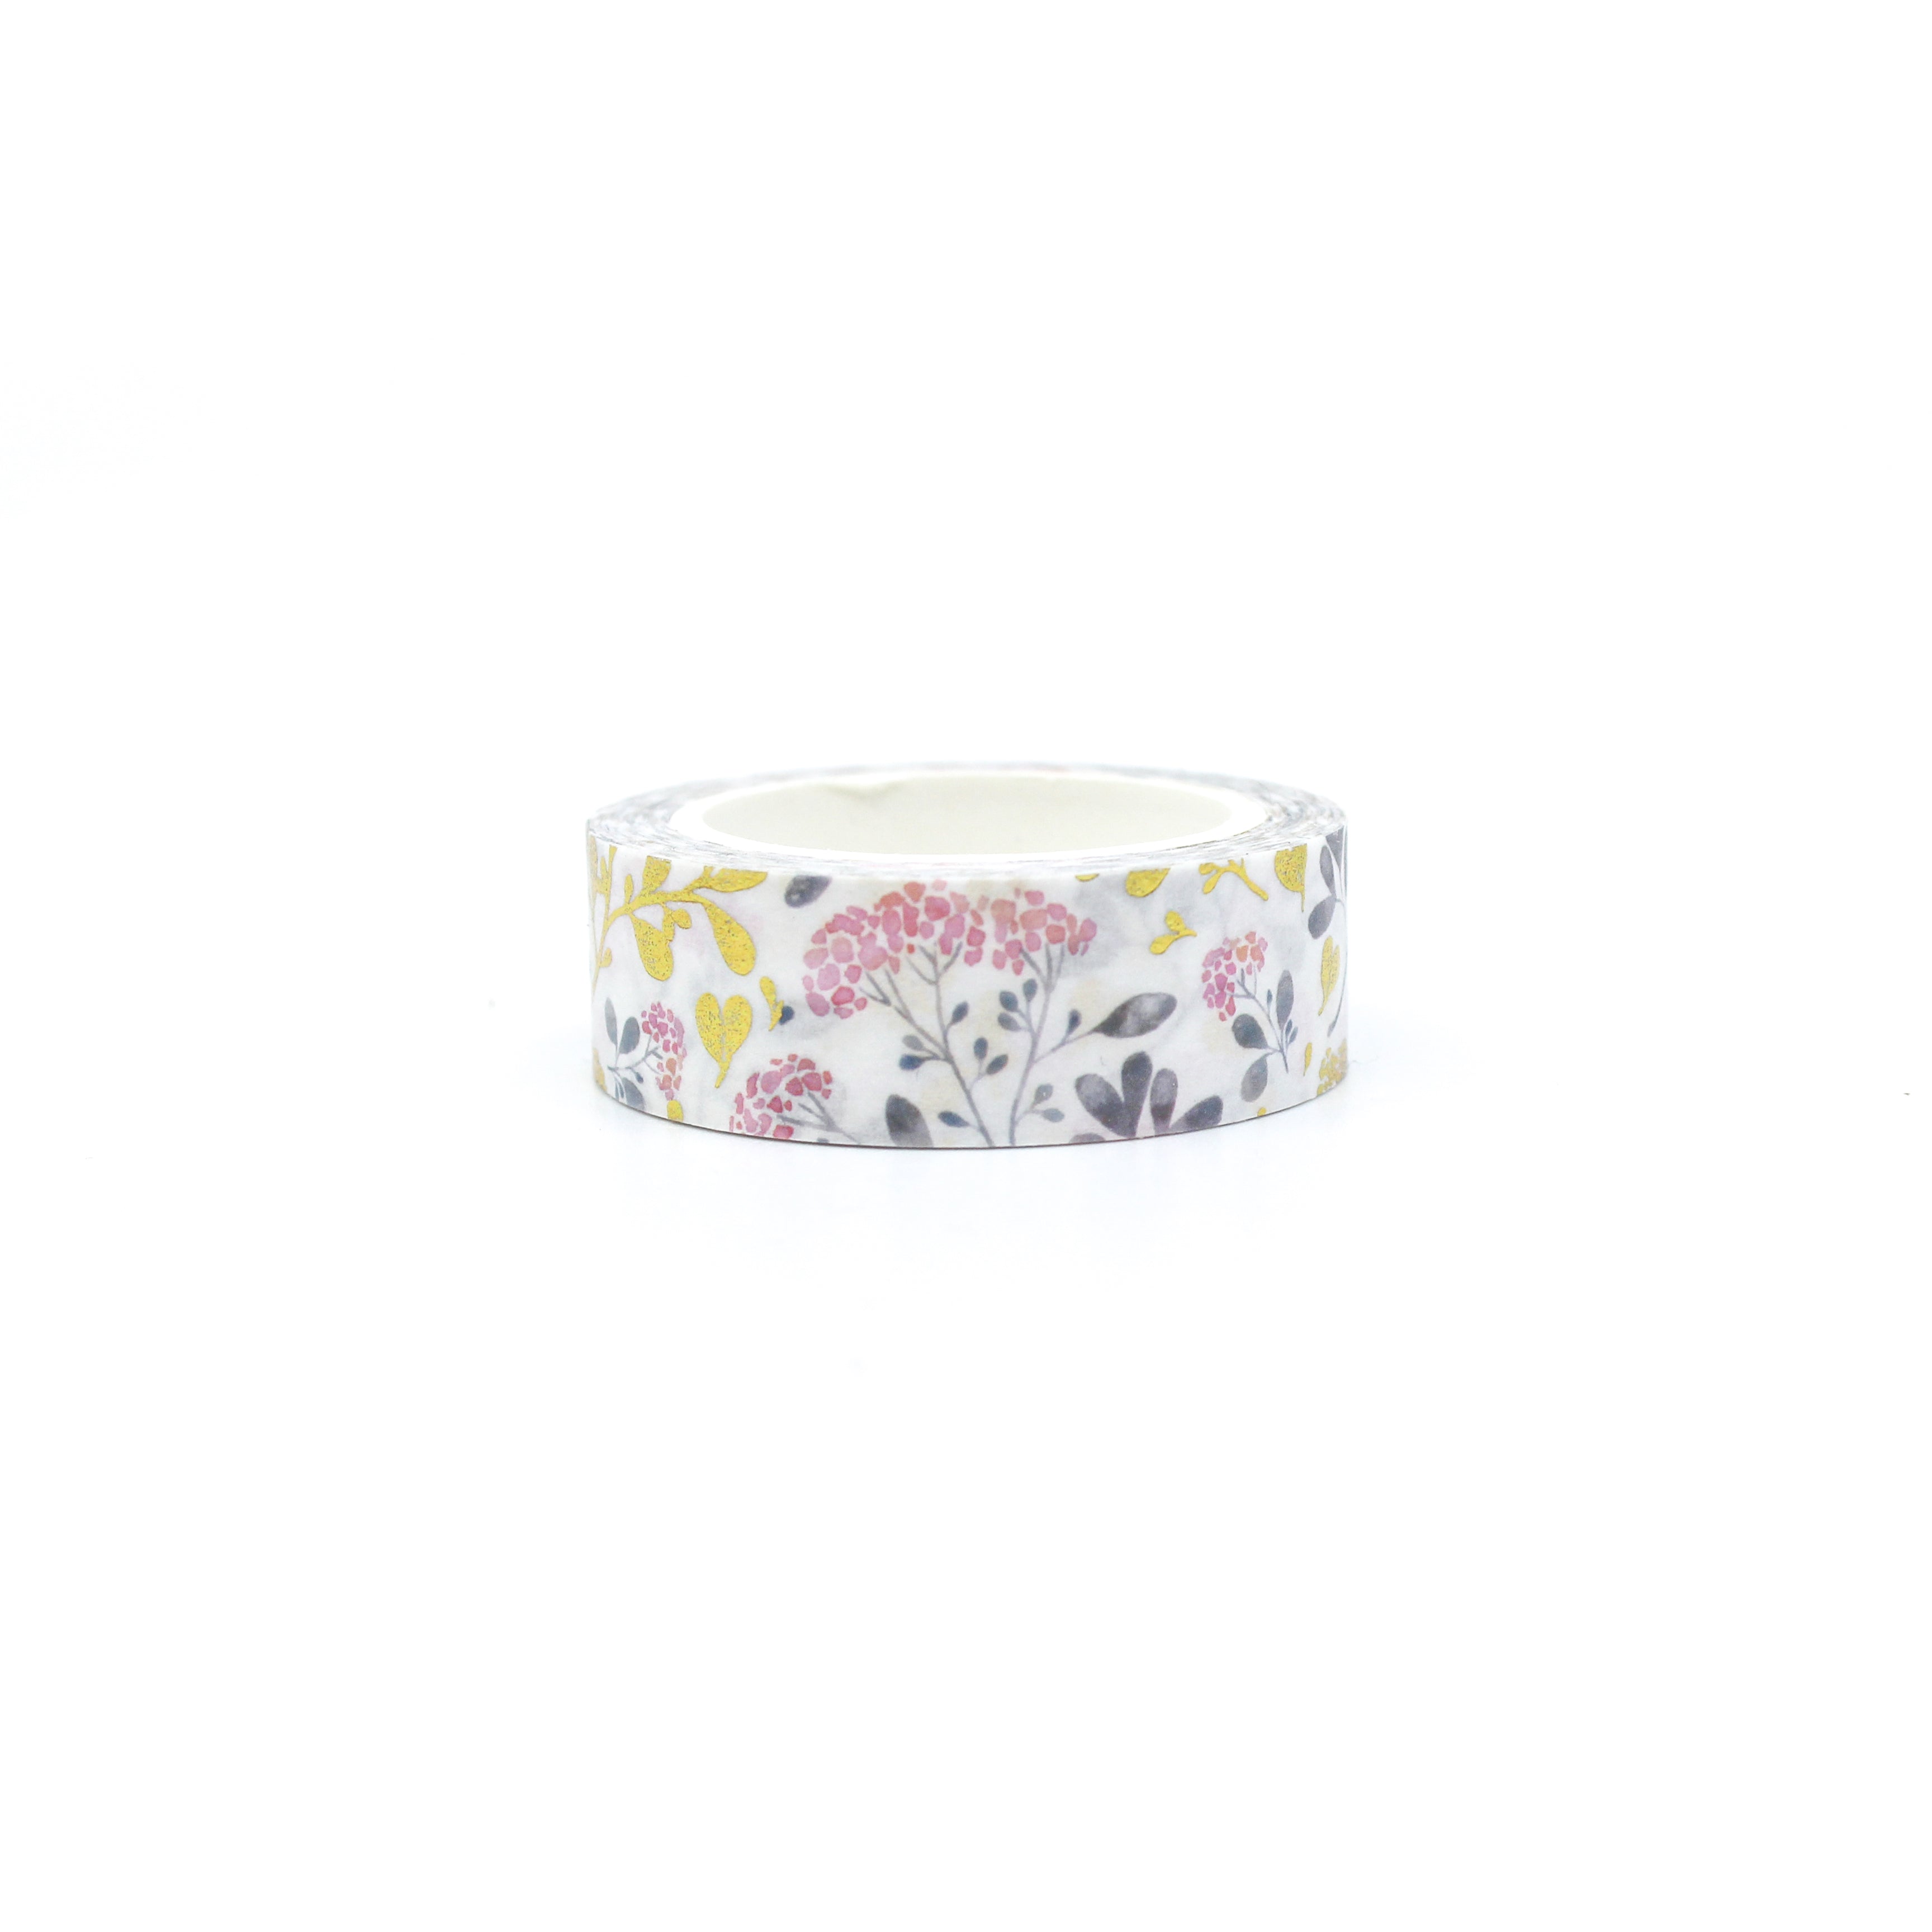 Add a touch of elegance to your crafts with our hydrangea floral washi tape, featuring beautiful hydrangea blooms adorned with shimmering gold foil accents. This tape is sold at BBB Supplies Craft Shop.